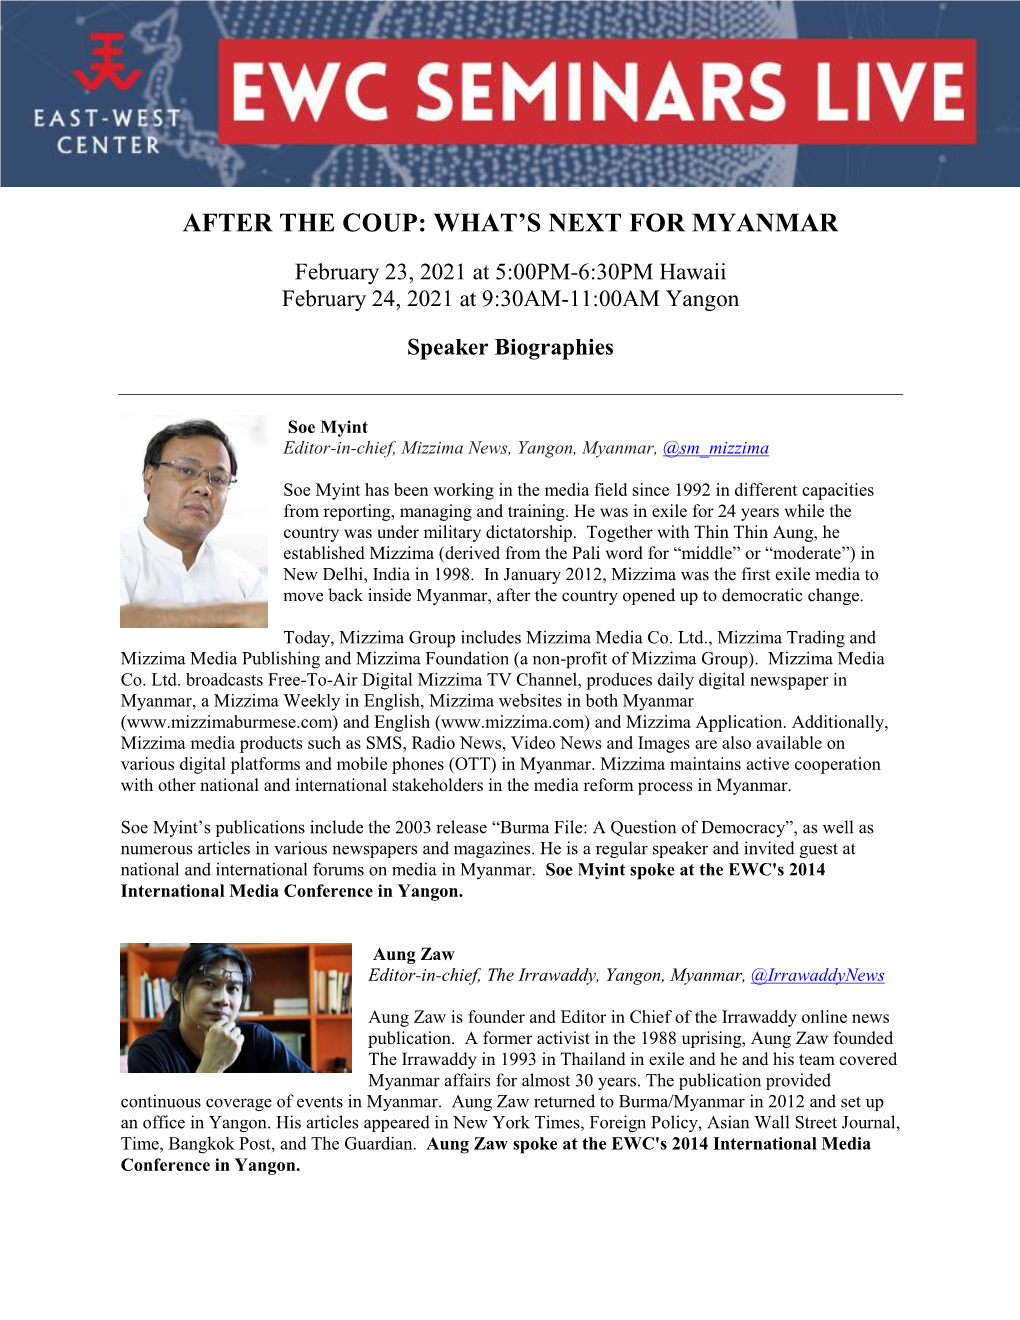 What's Next for Myanmar